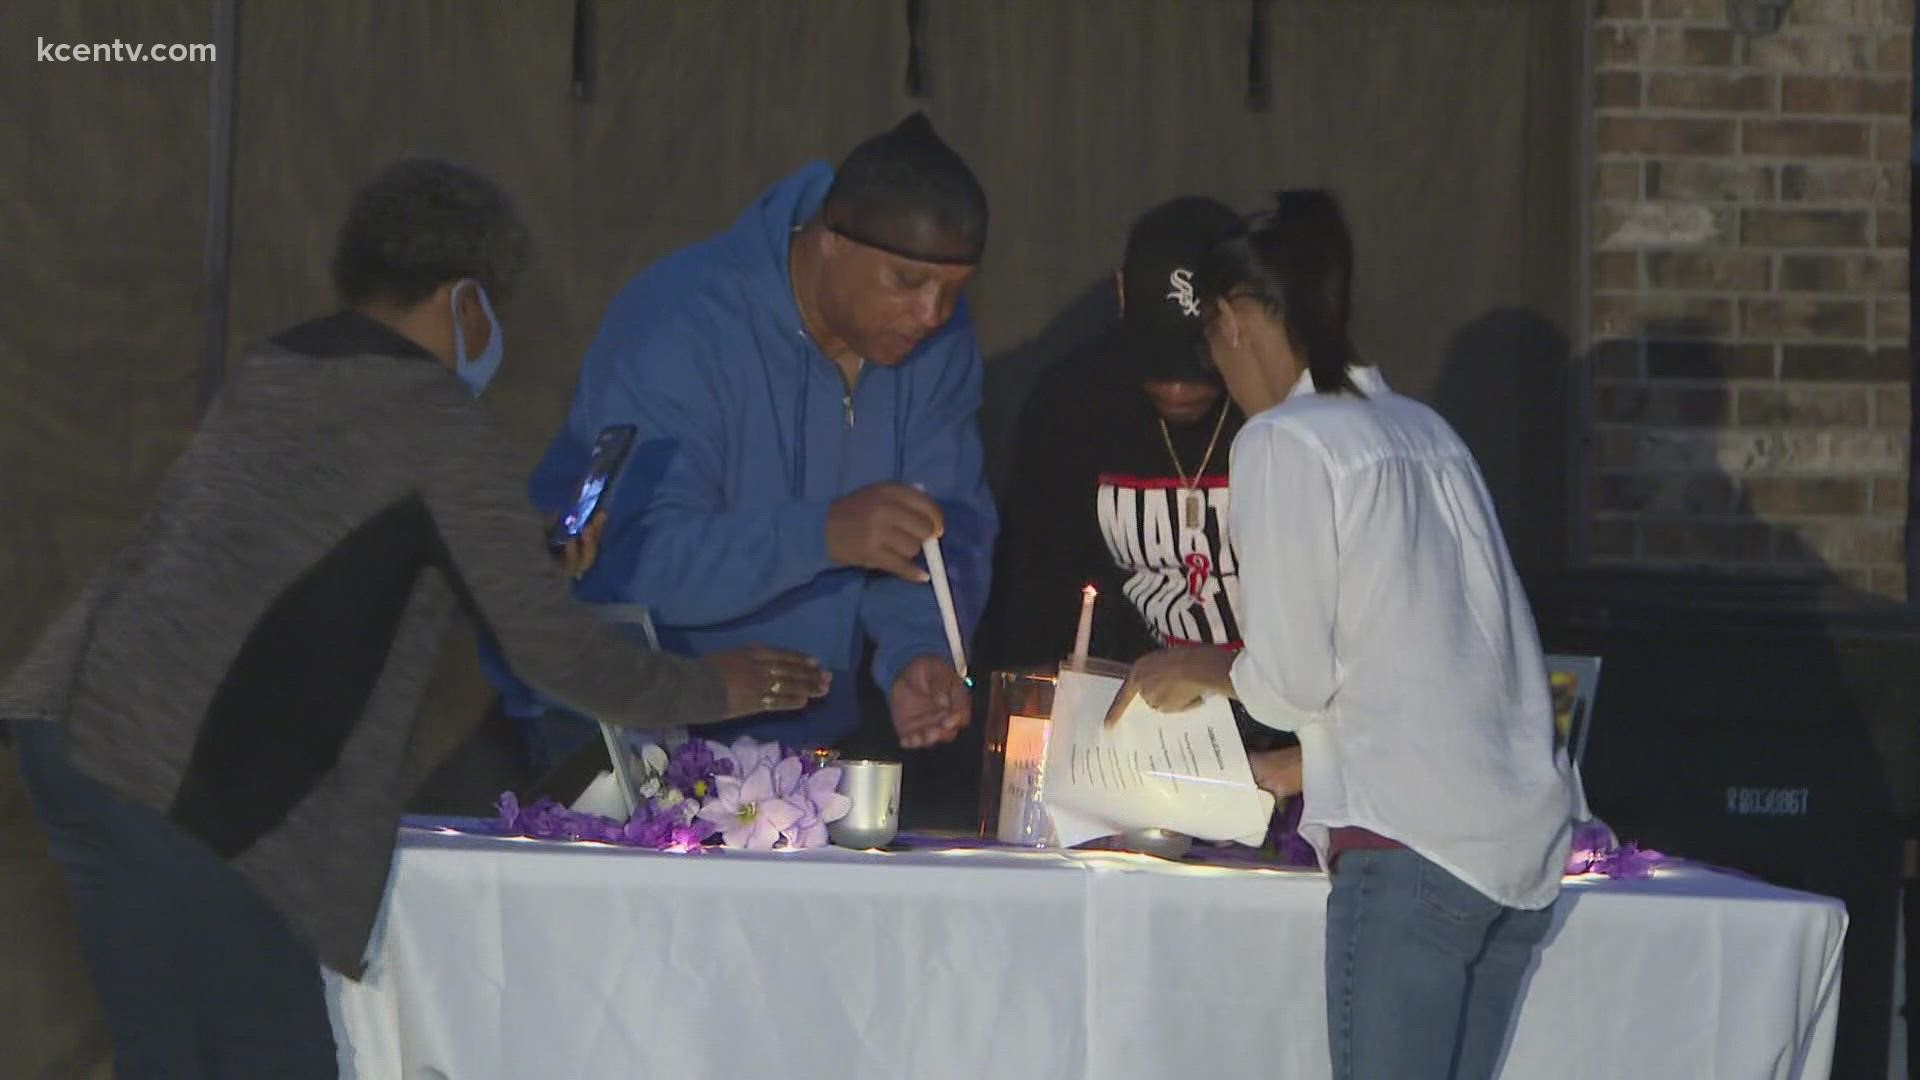 Monday evening, a community gathered where cousins Makayla Martin and Alyssa Whitfield spent their last play date together Saturday morning before being shot.